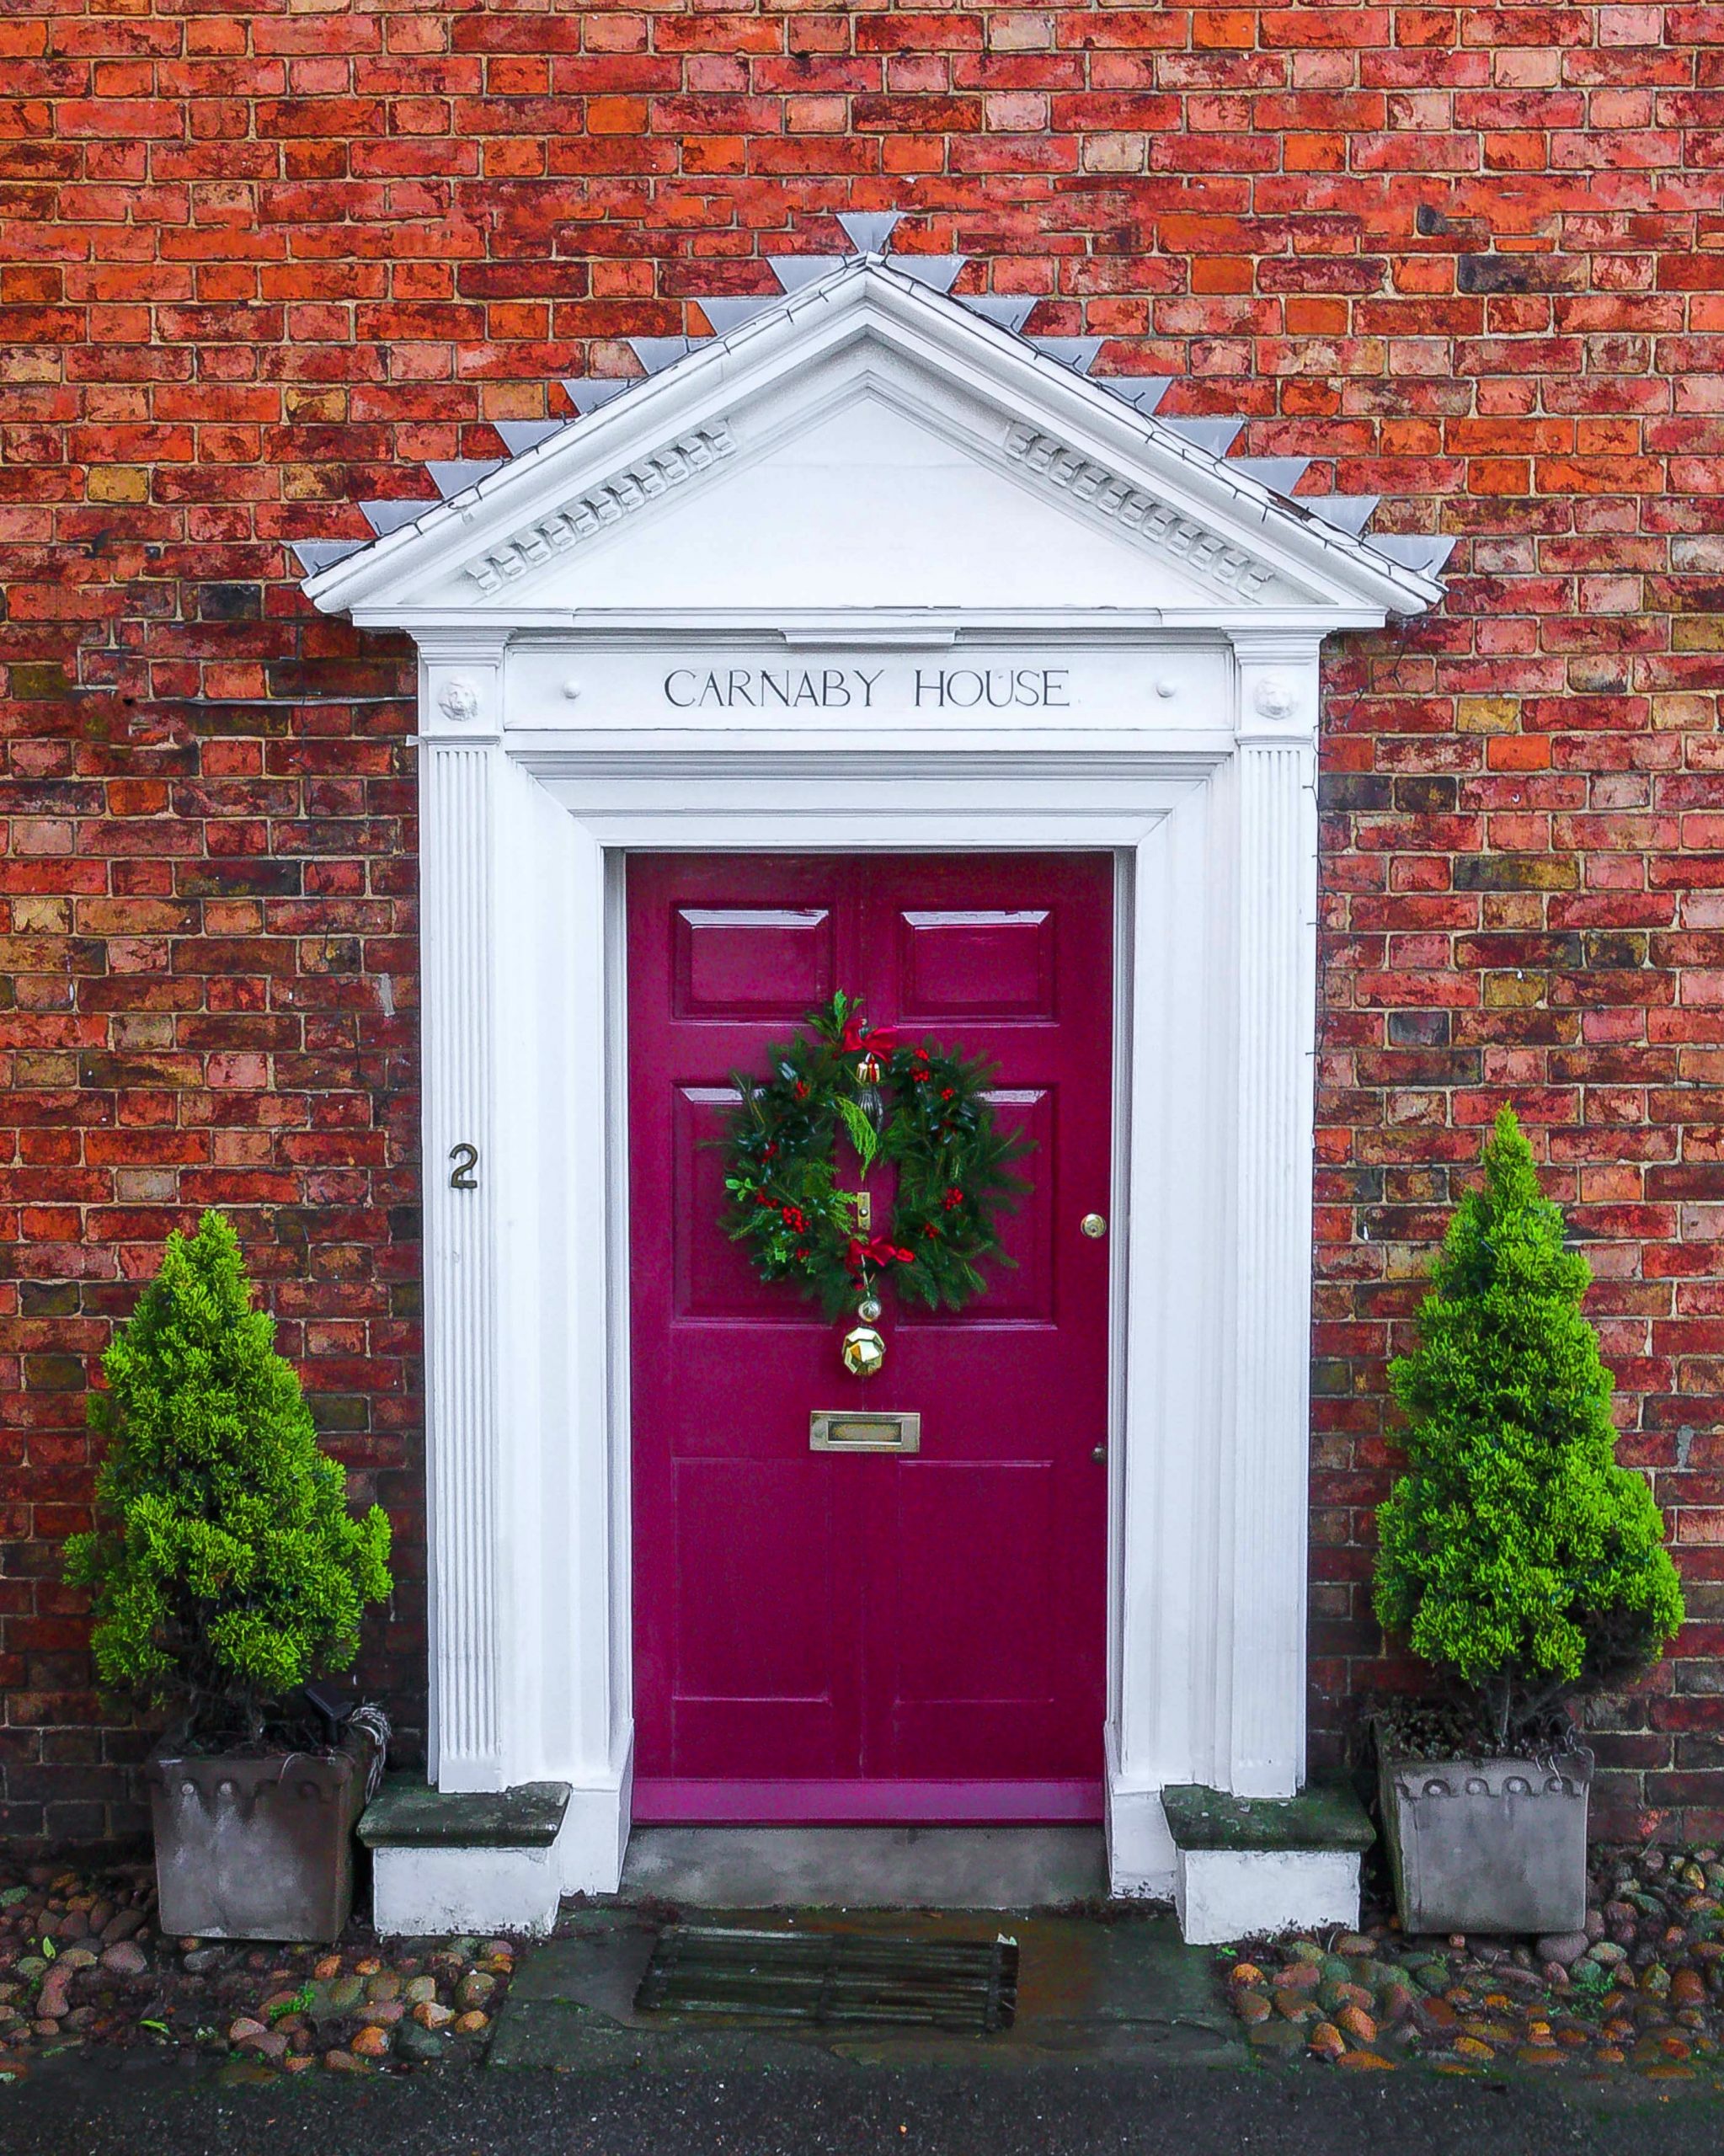 A Christmas Wreath on a door in Kimbolton.